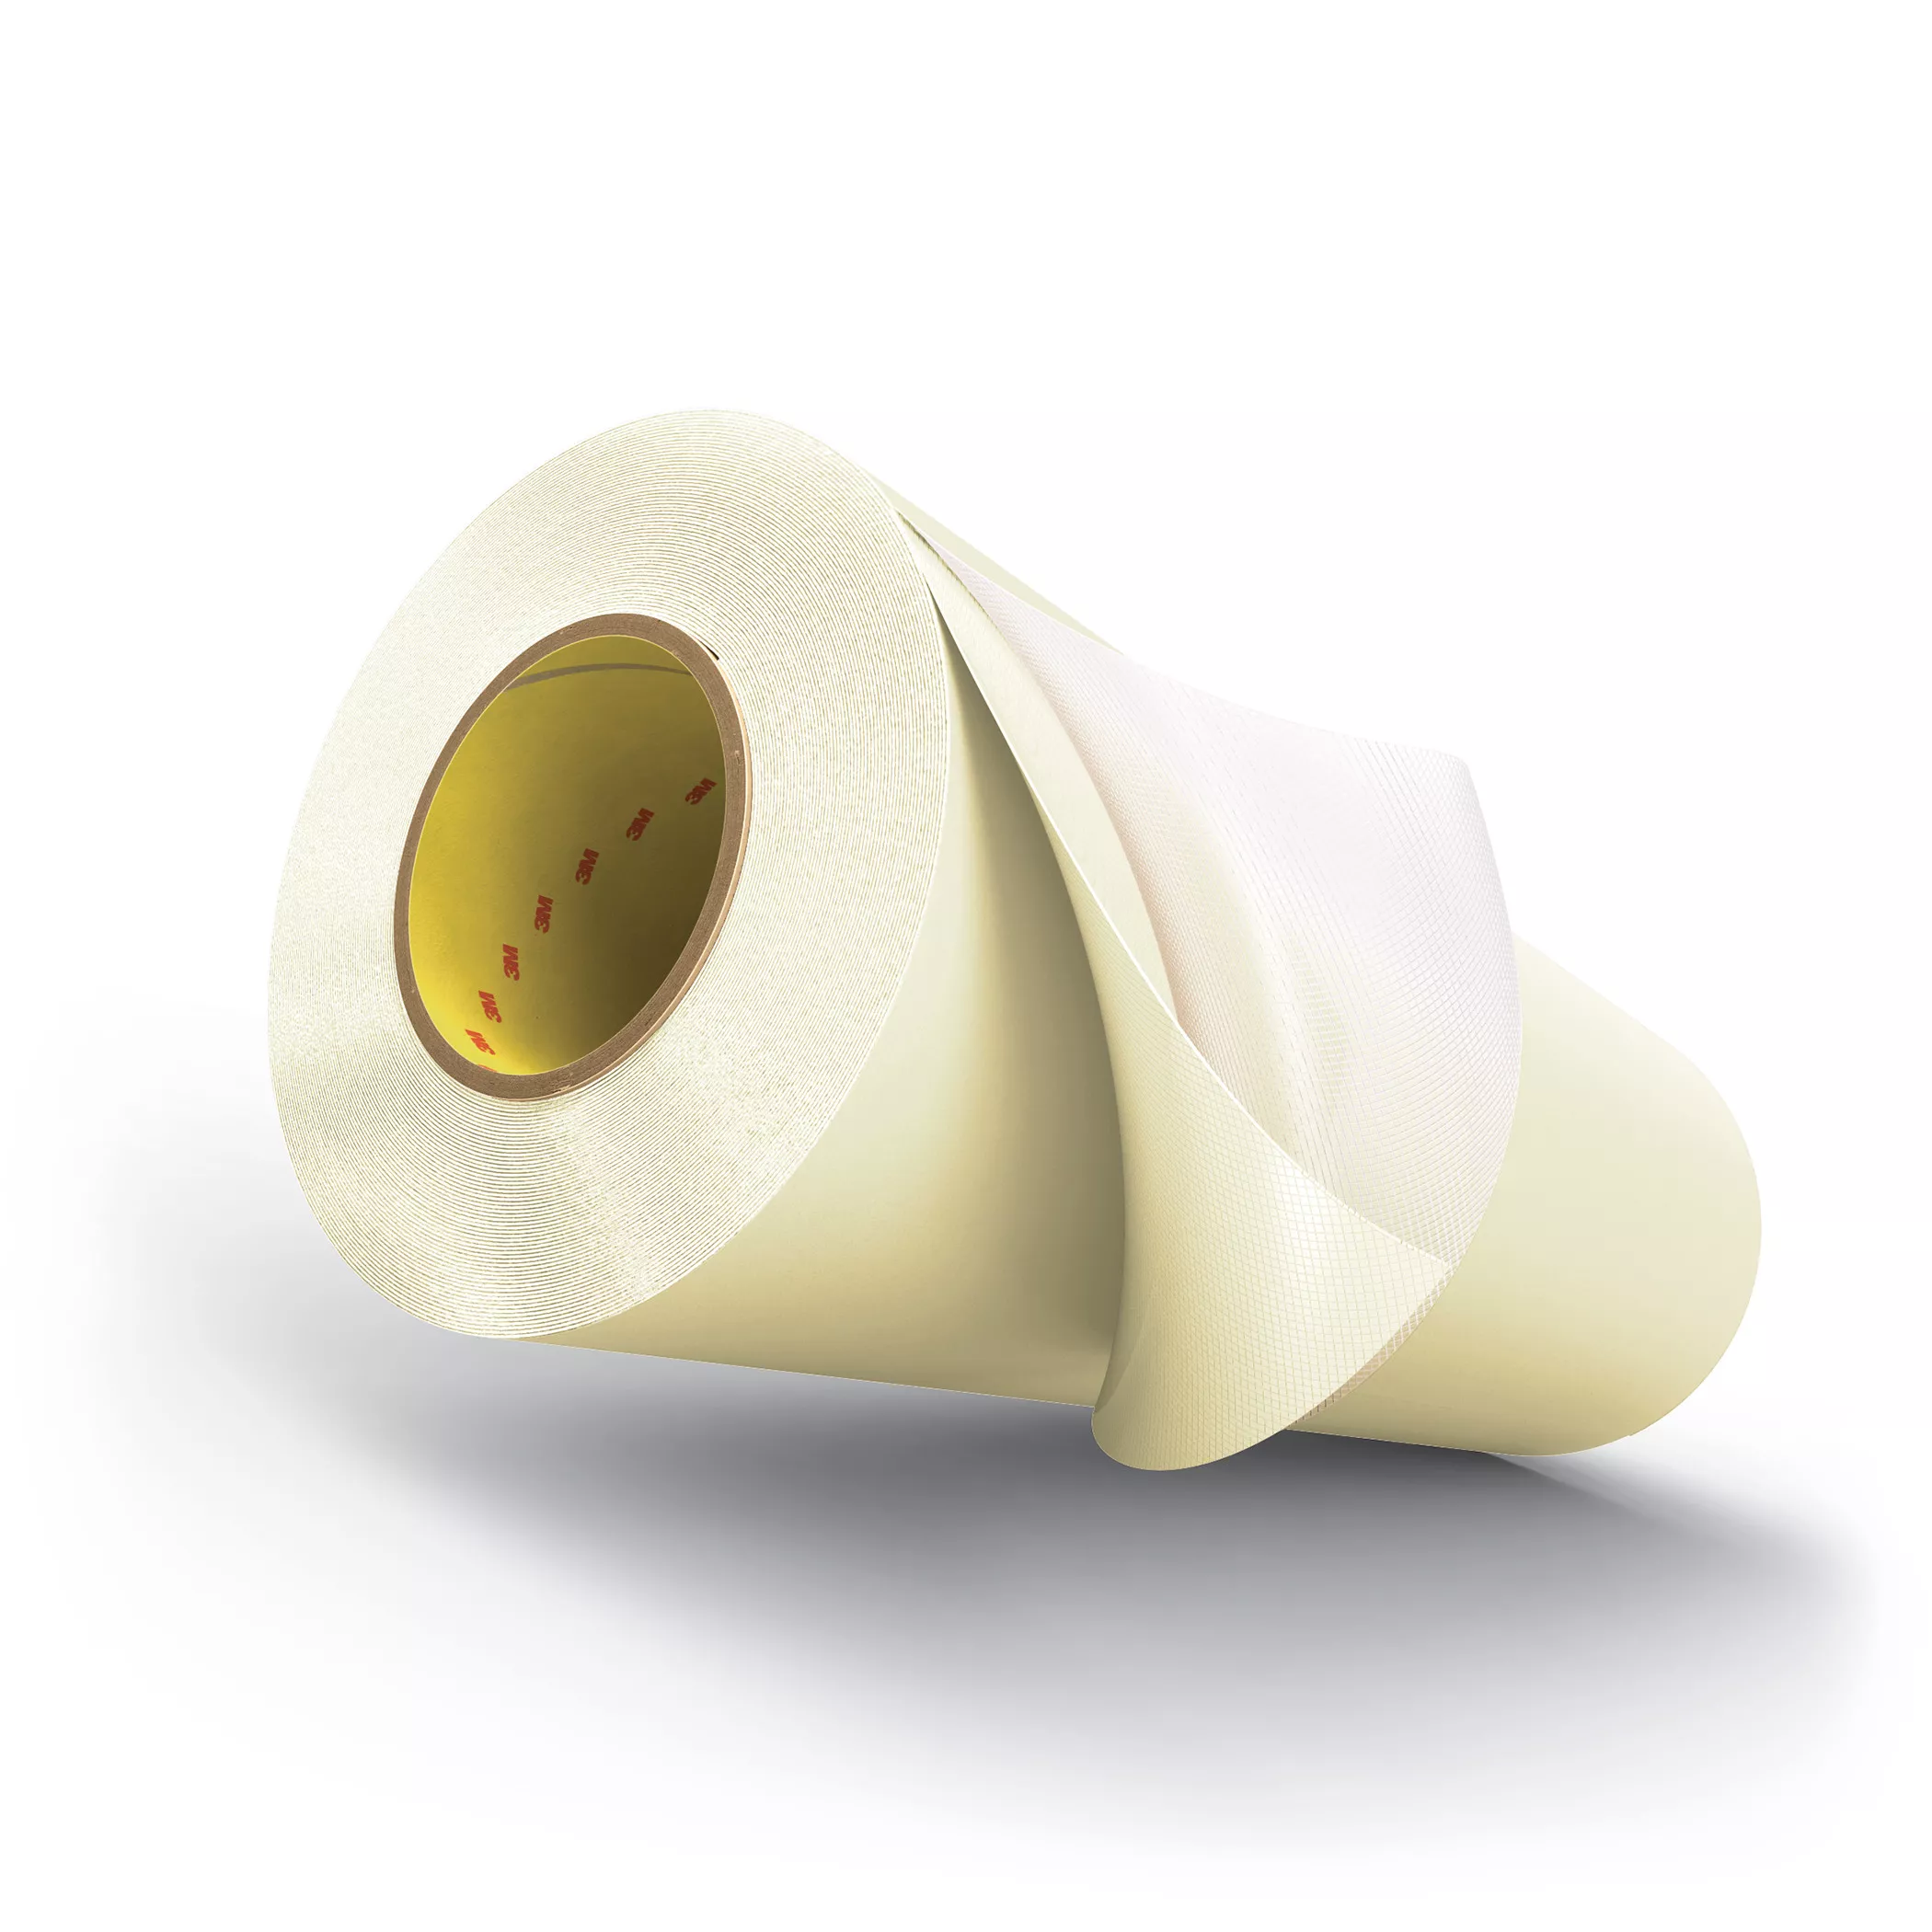 3M™ Cushion-Mount™ Plus Plate Mounting Tape E1020, White, 18 in x 25 yd,
20 mil, 1 Roll/Case